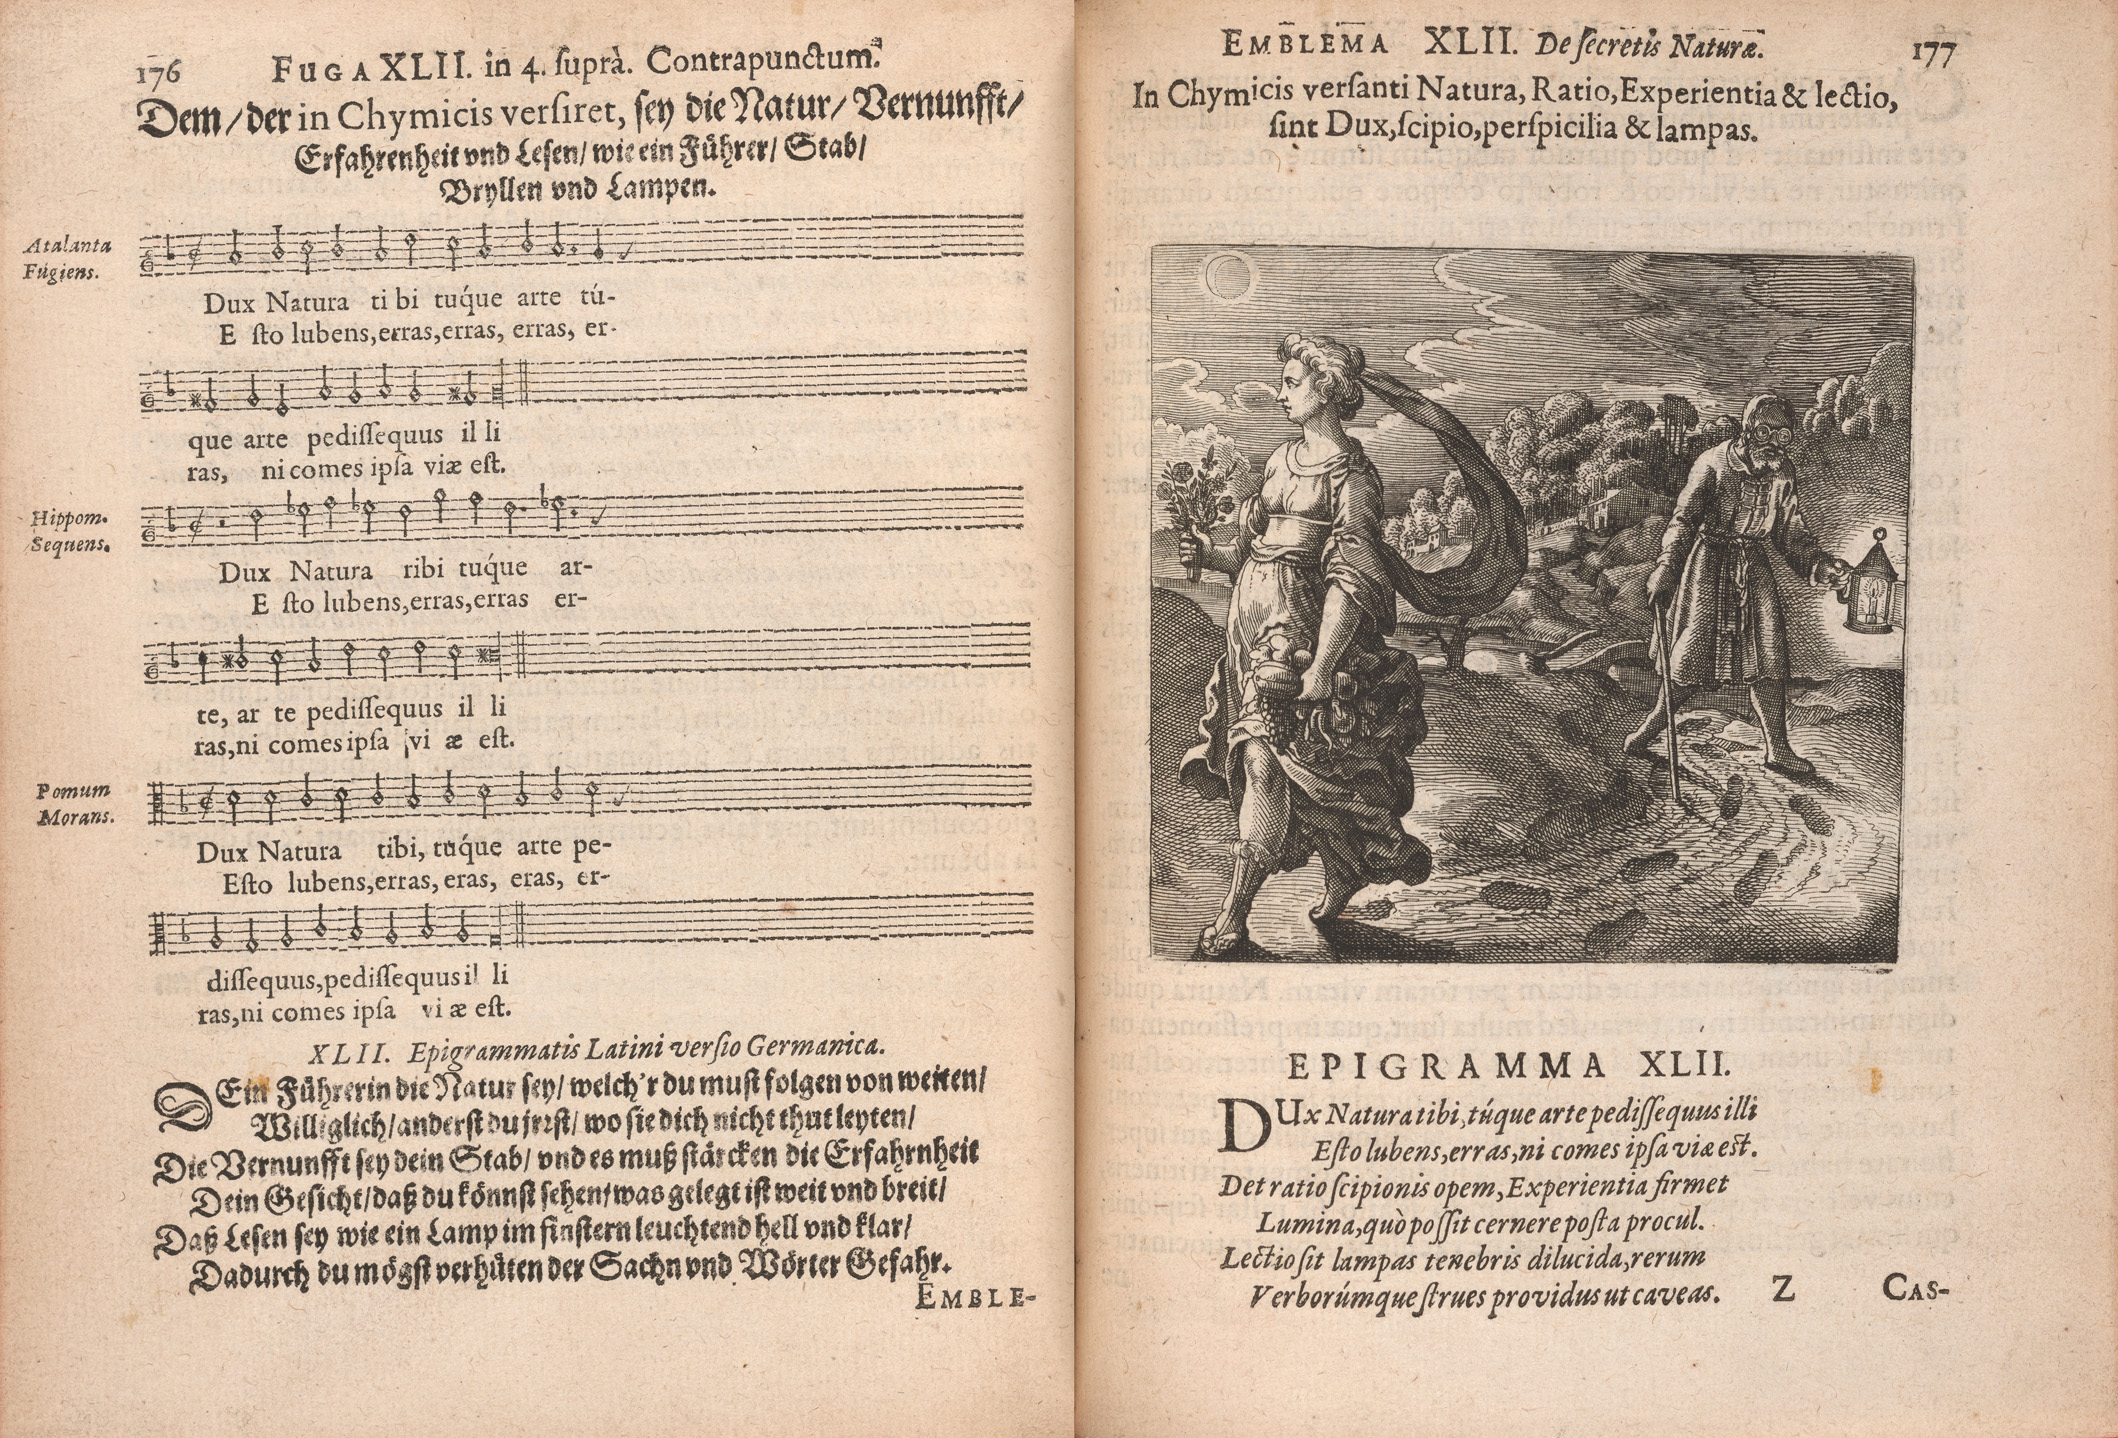 A two-page spread of emblem 42 from Atalanta fugiens consists of musical notation and a German translation of the epigram on the left-hand page and a Latin motto, etching, and Latin version of the epigram on the right-hand side. In the emblem, a bearded man wearing spectacles and holding a lantern and staff is following in the footprints of a woman in classical clothing holding a cornucopia and bouquet during an eclipse.